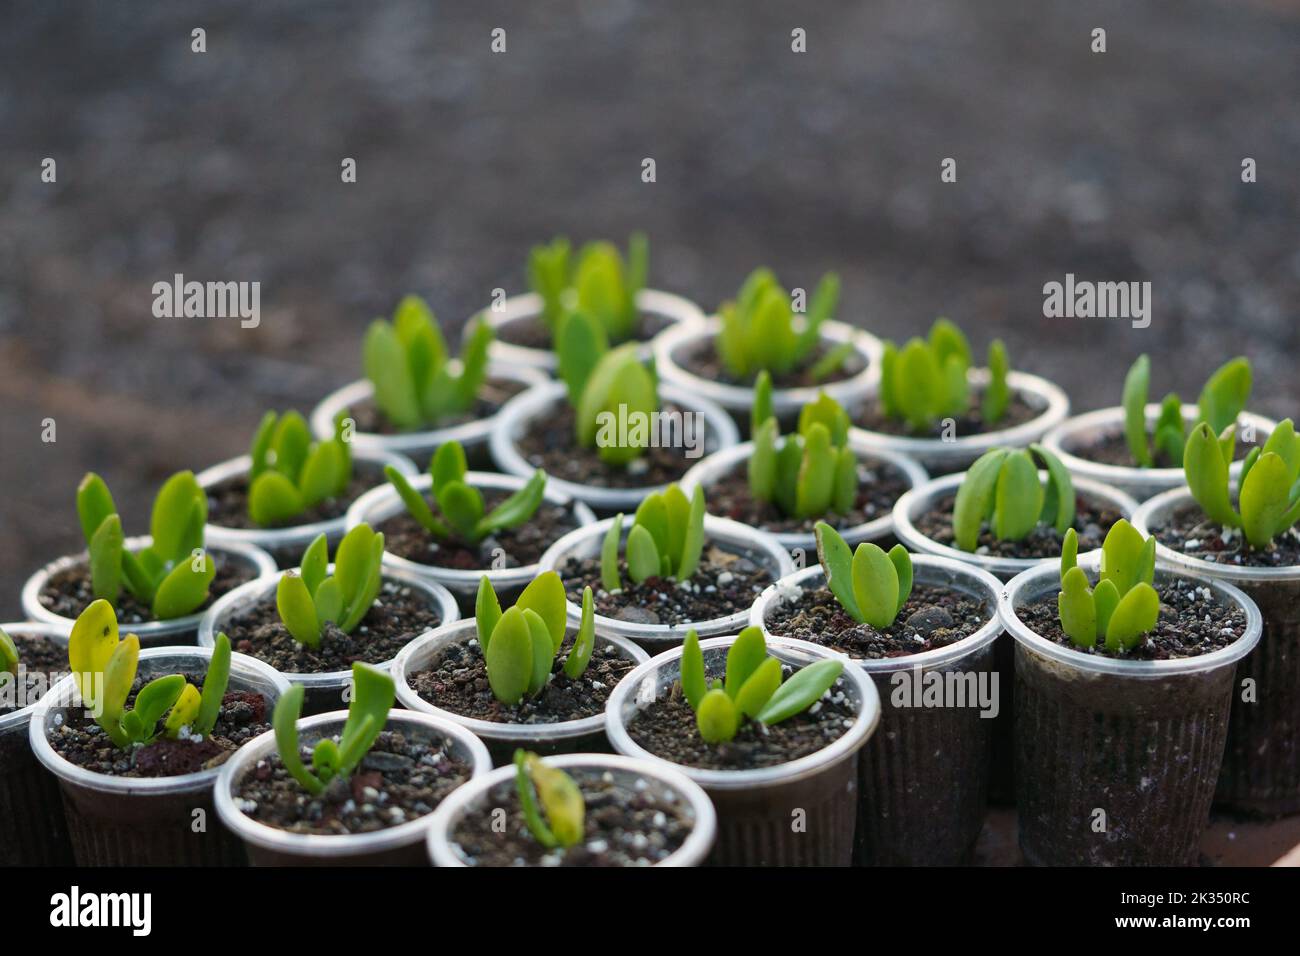 First sprouts of plants pierced through soil growing in plastic pots and standing in brown tray Stock Photo